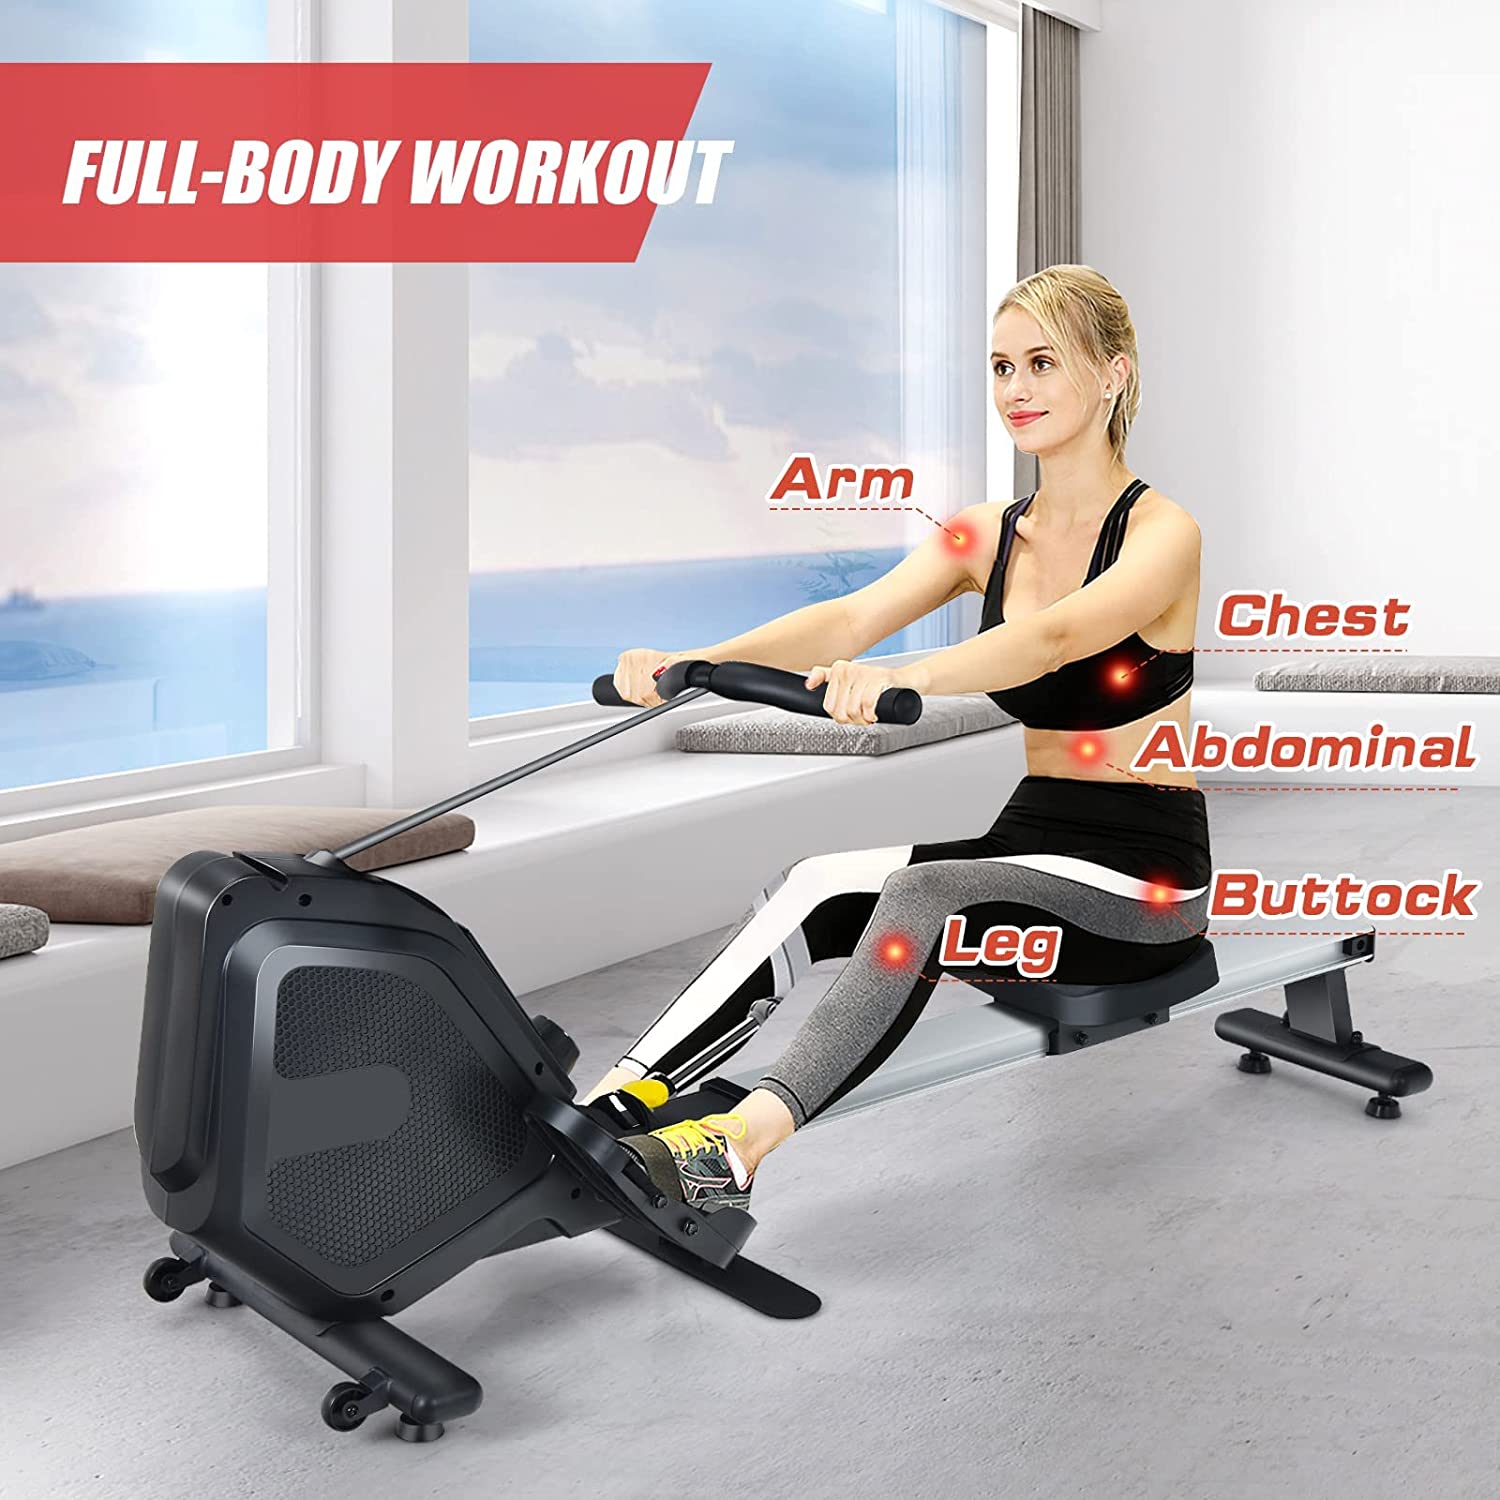 Chairliving Foldable Magnetic Rowing Machine Full-Body Exercise Rower with 8 Level Adjustable Resistance and Digital Monitor for Gym Office Home